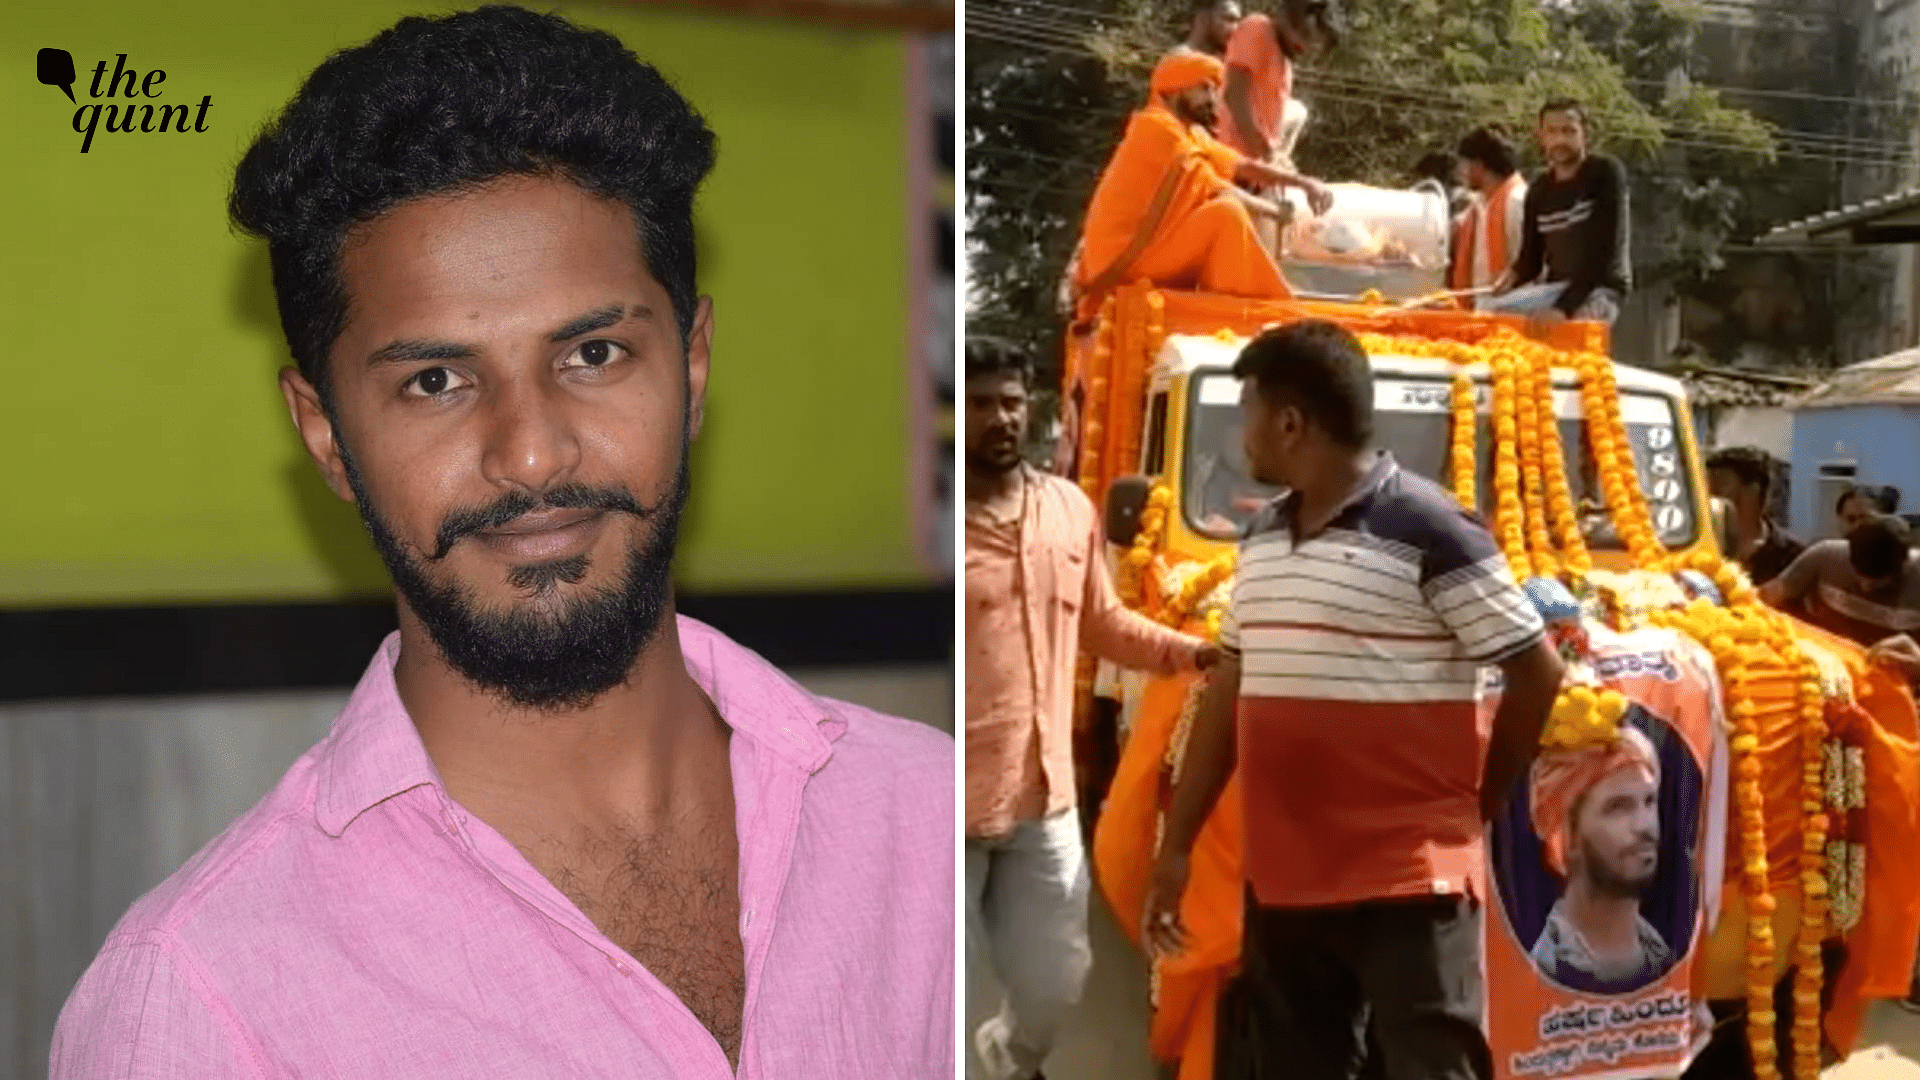 <div class="paragraphs"><p>A 26-year-old Bajrang Dal member named Harsha was stabbed to death by unknown assailants late on Sunday, 20 February, at Bharathi Colony in Karnataka's Shivamogga, leading to heightened tensions and beefed-up security in the region.</p></div>